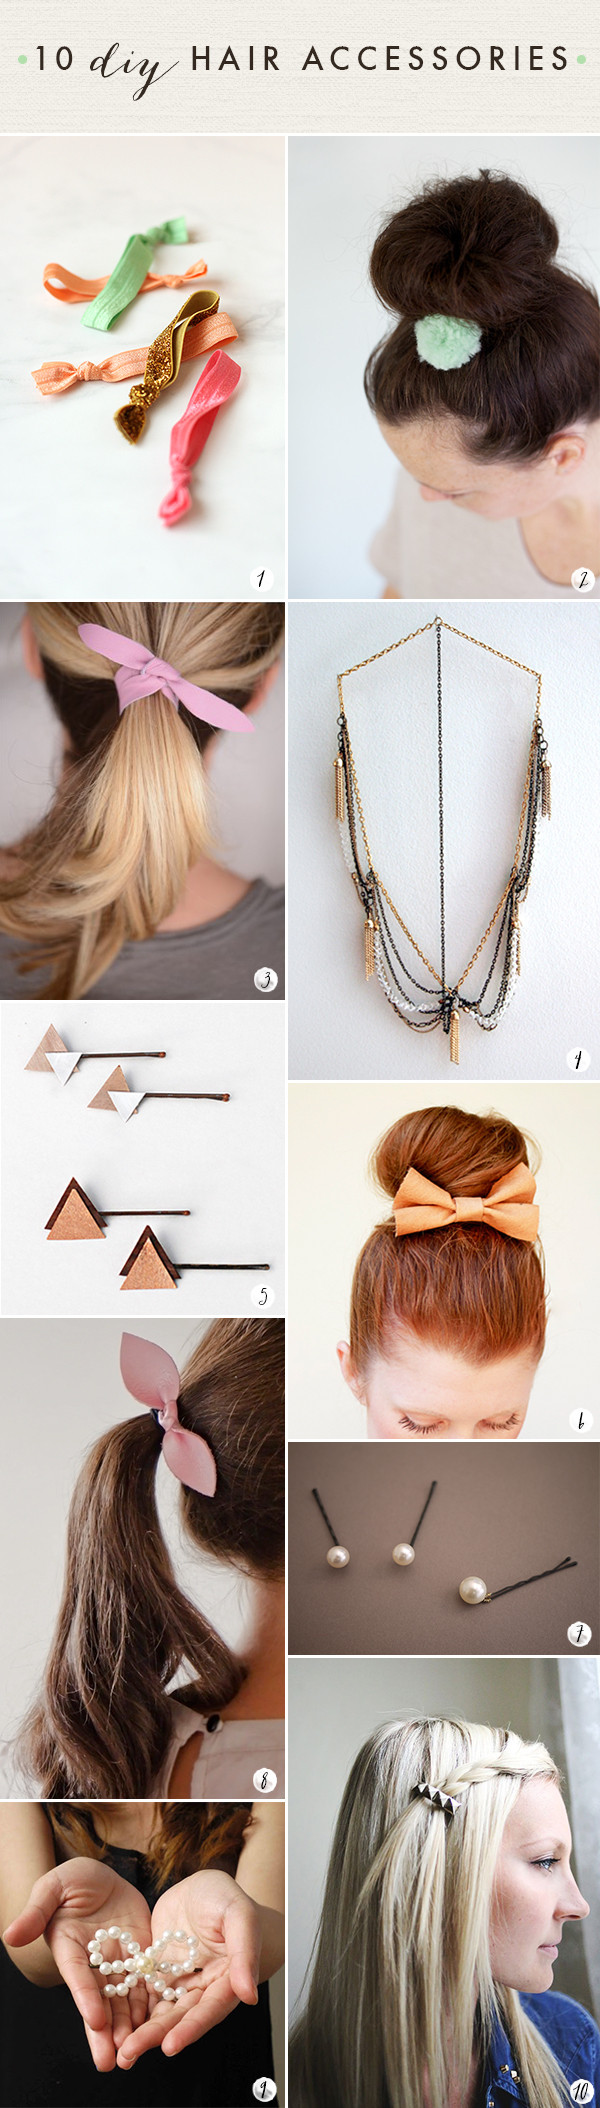 DIY Hair Accessories
 Oh the lovely things 60 DIY Accessories Last Minute